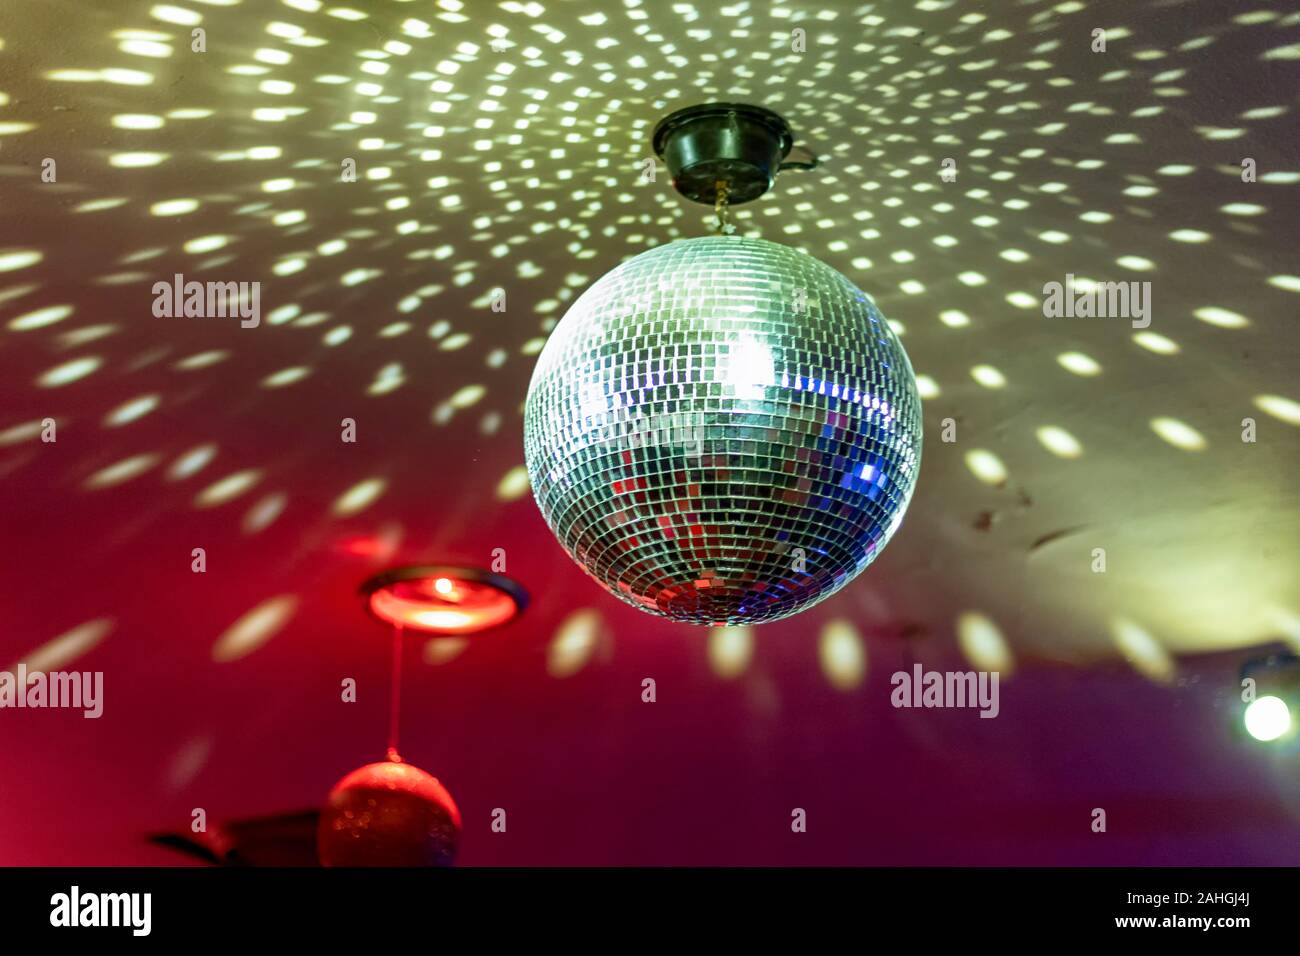 Golden Disco Ball With Light Rays Stock Illustration - Download